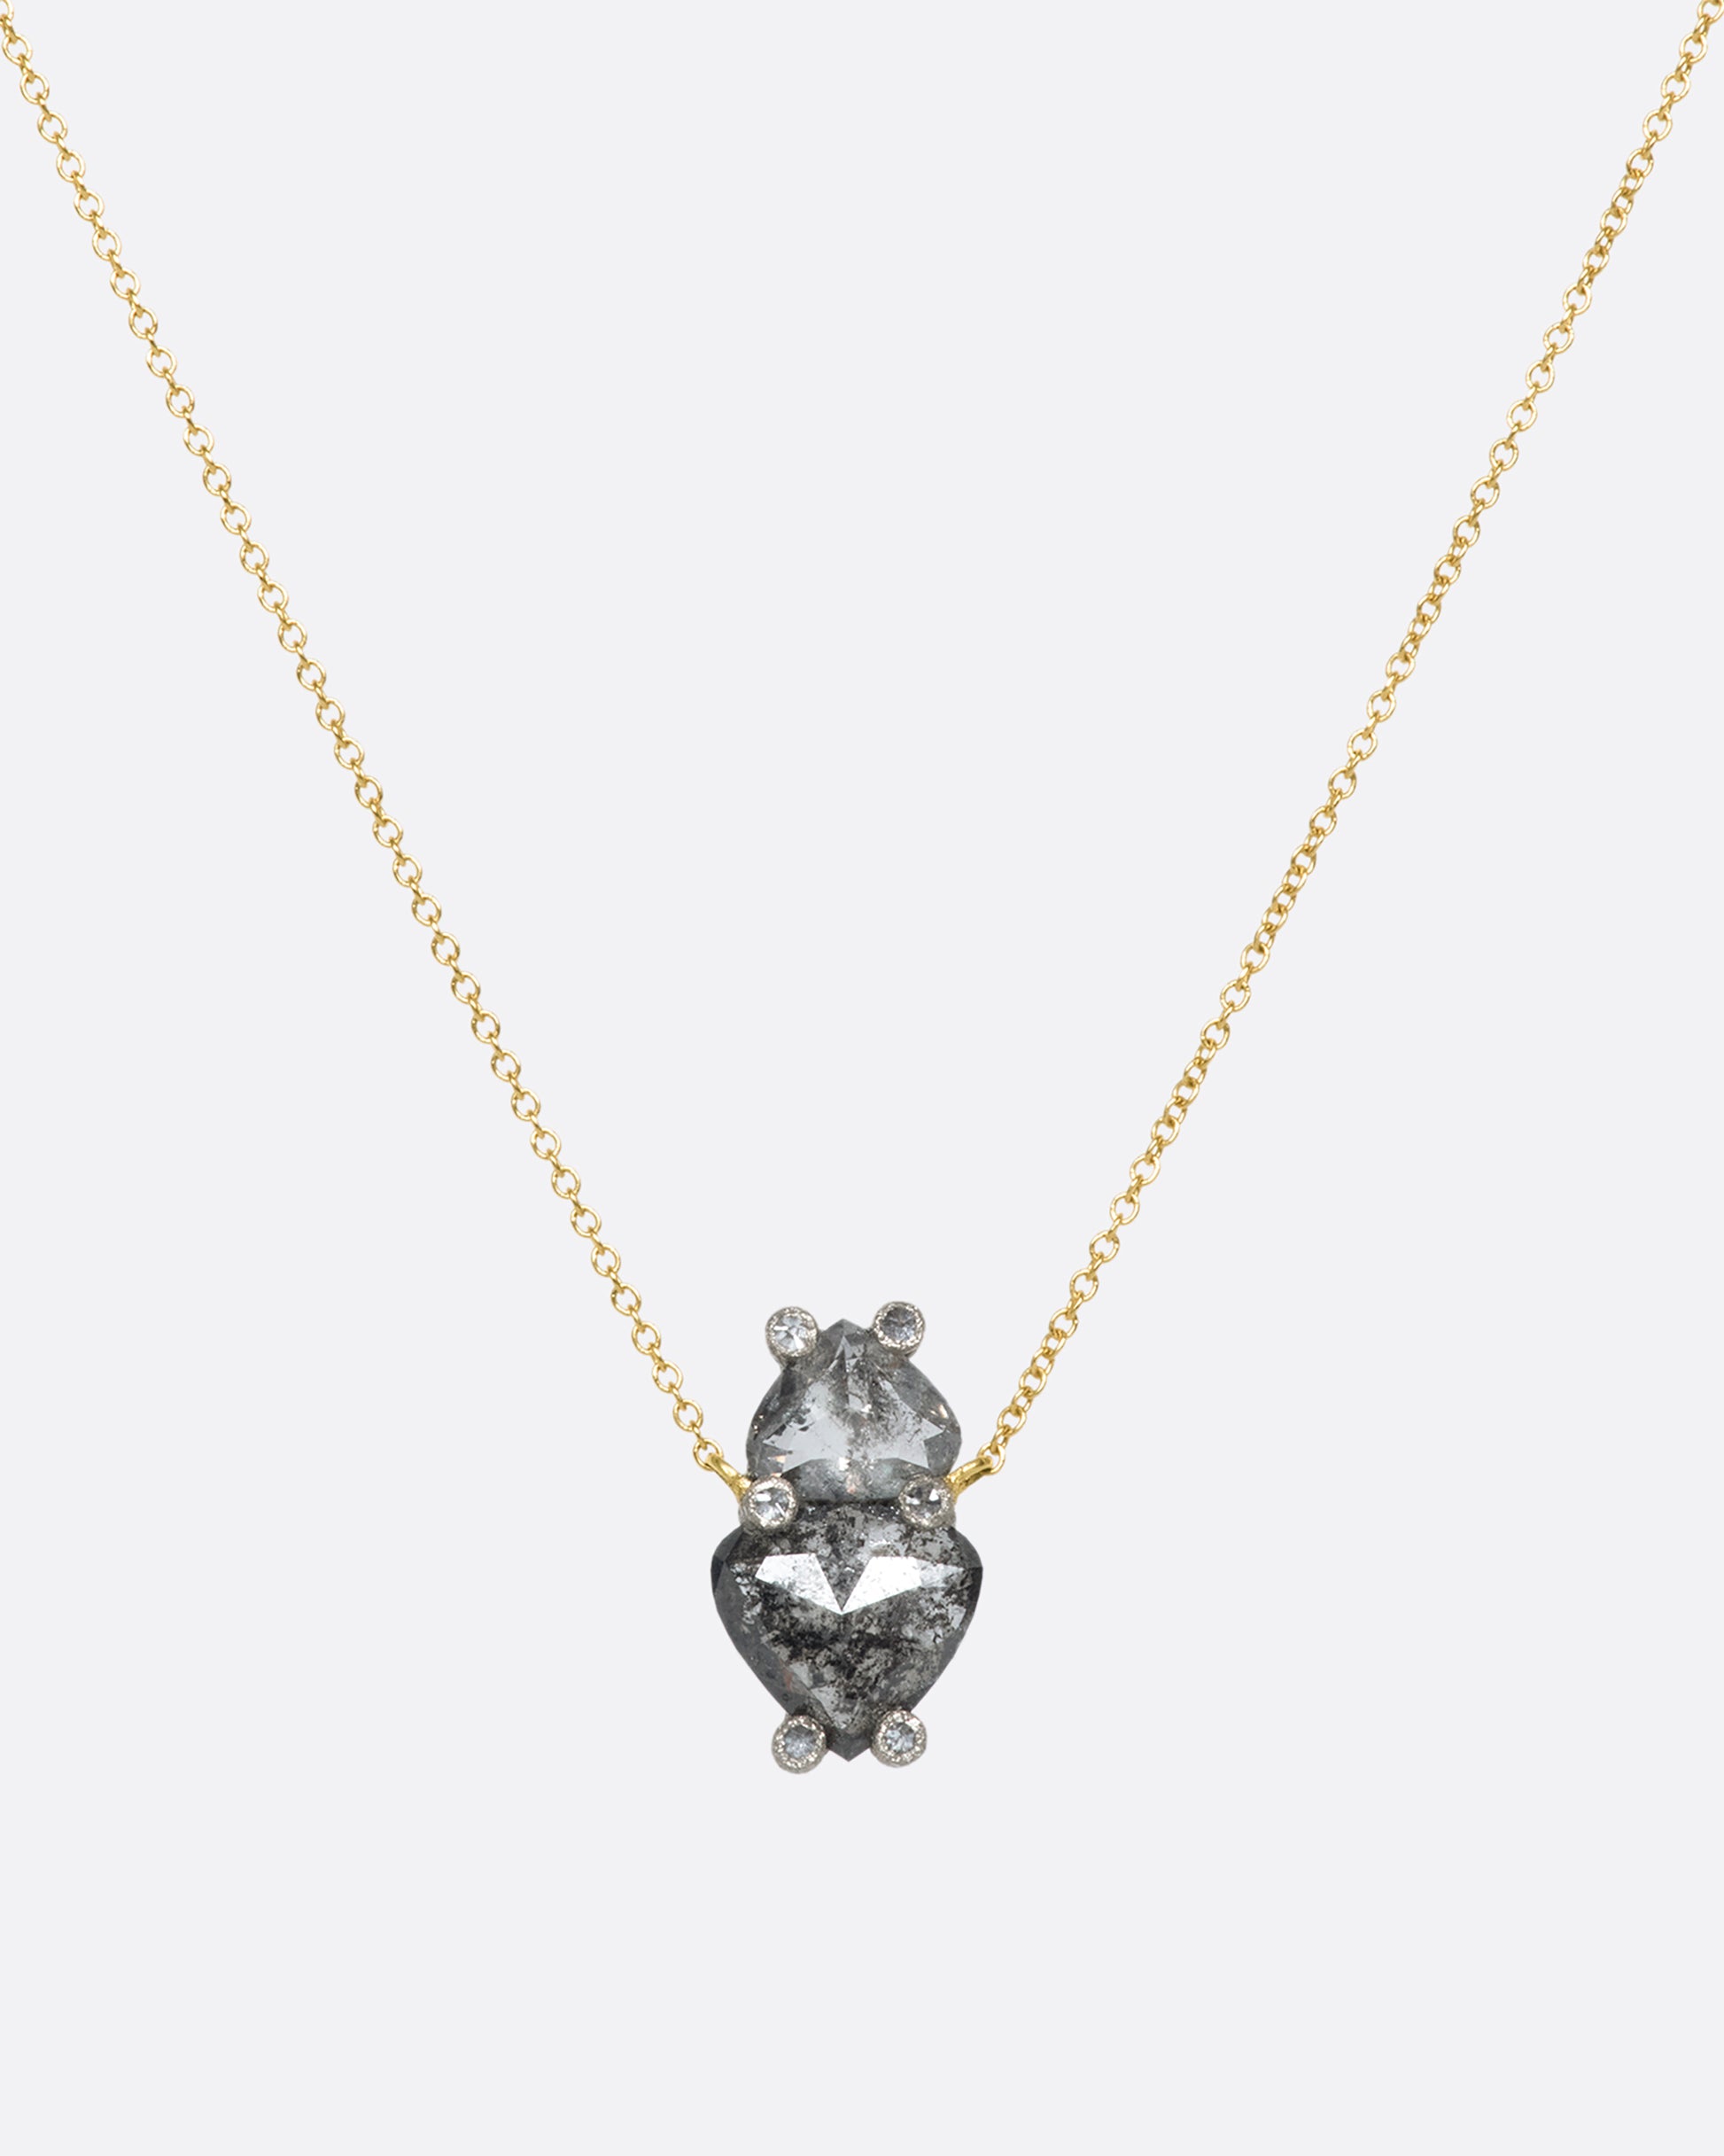 A hanging pendant with two shield cut grey diamonds on a yellow gold chain.